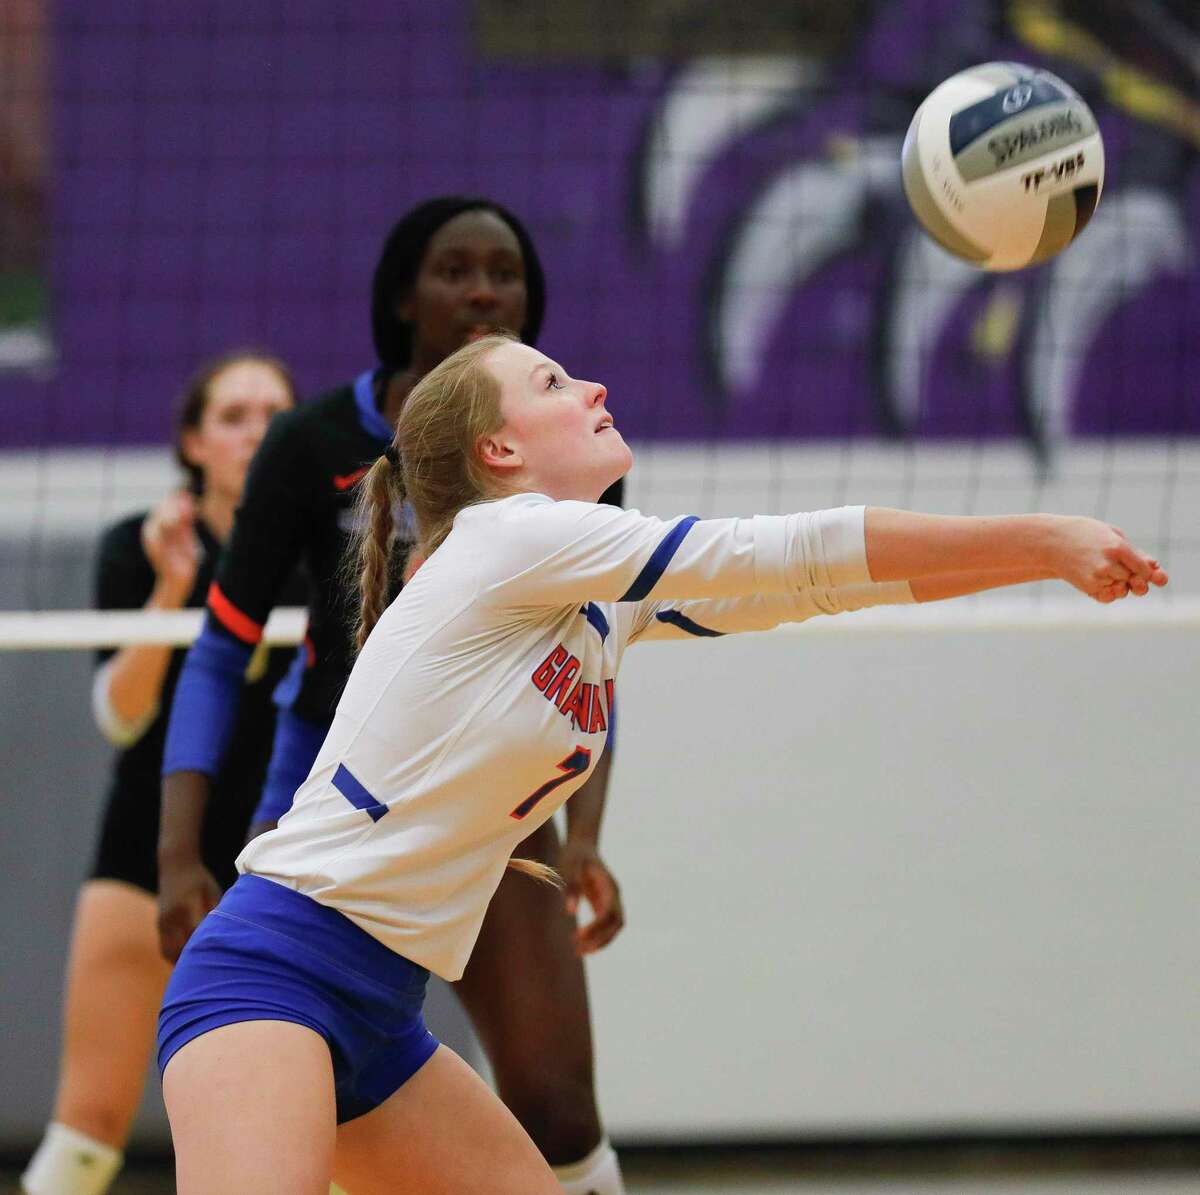 Grand Oaks libero Ava Terry (7) makes a pass in the first set of a high school volleyball match at Montgomery High School, Tuesday, Aug. 31, 2021, in Montgomery.